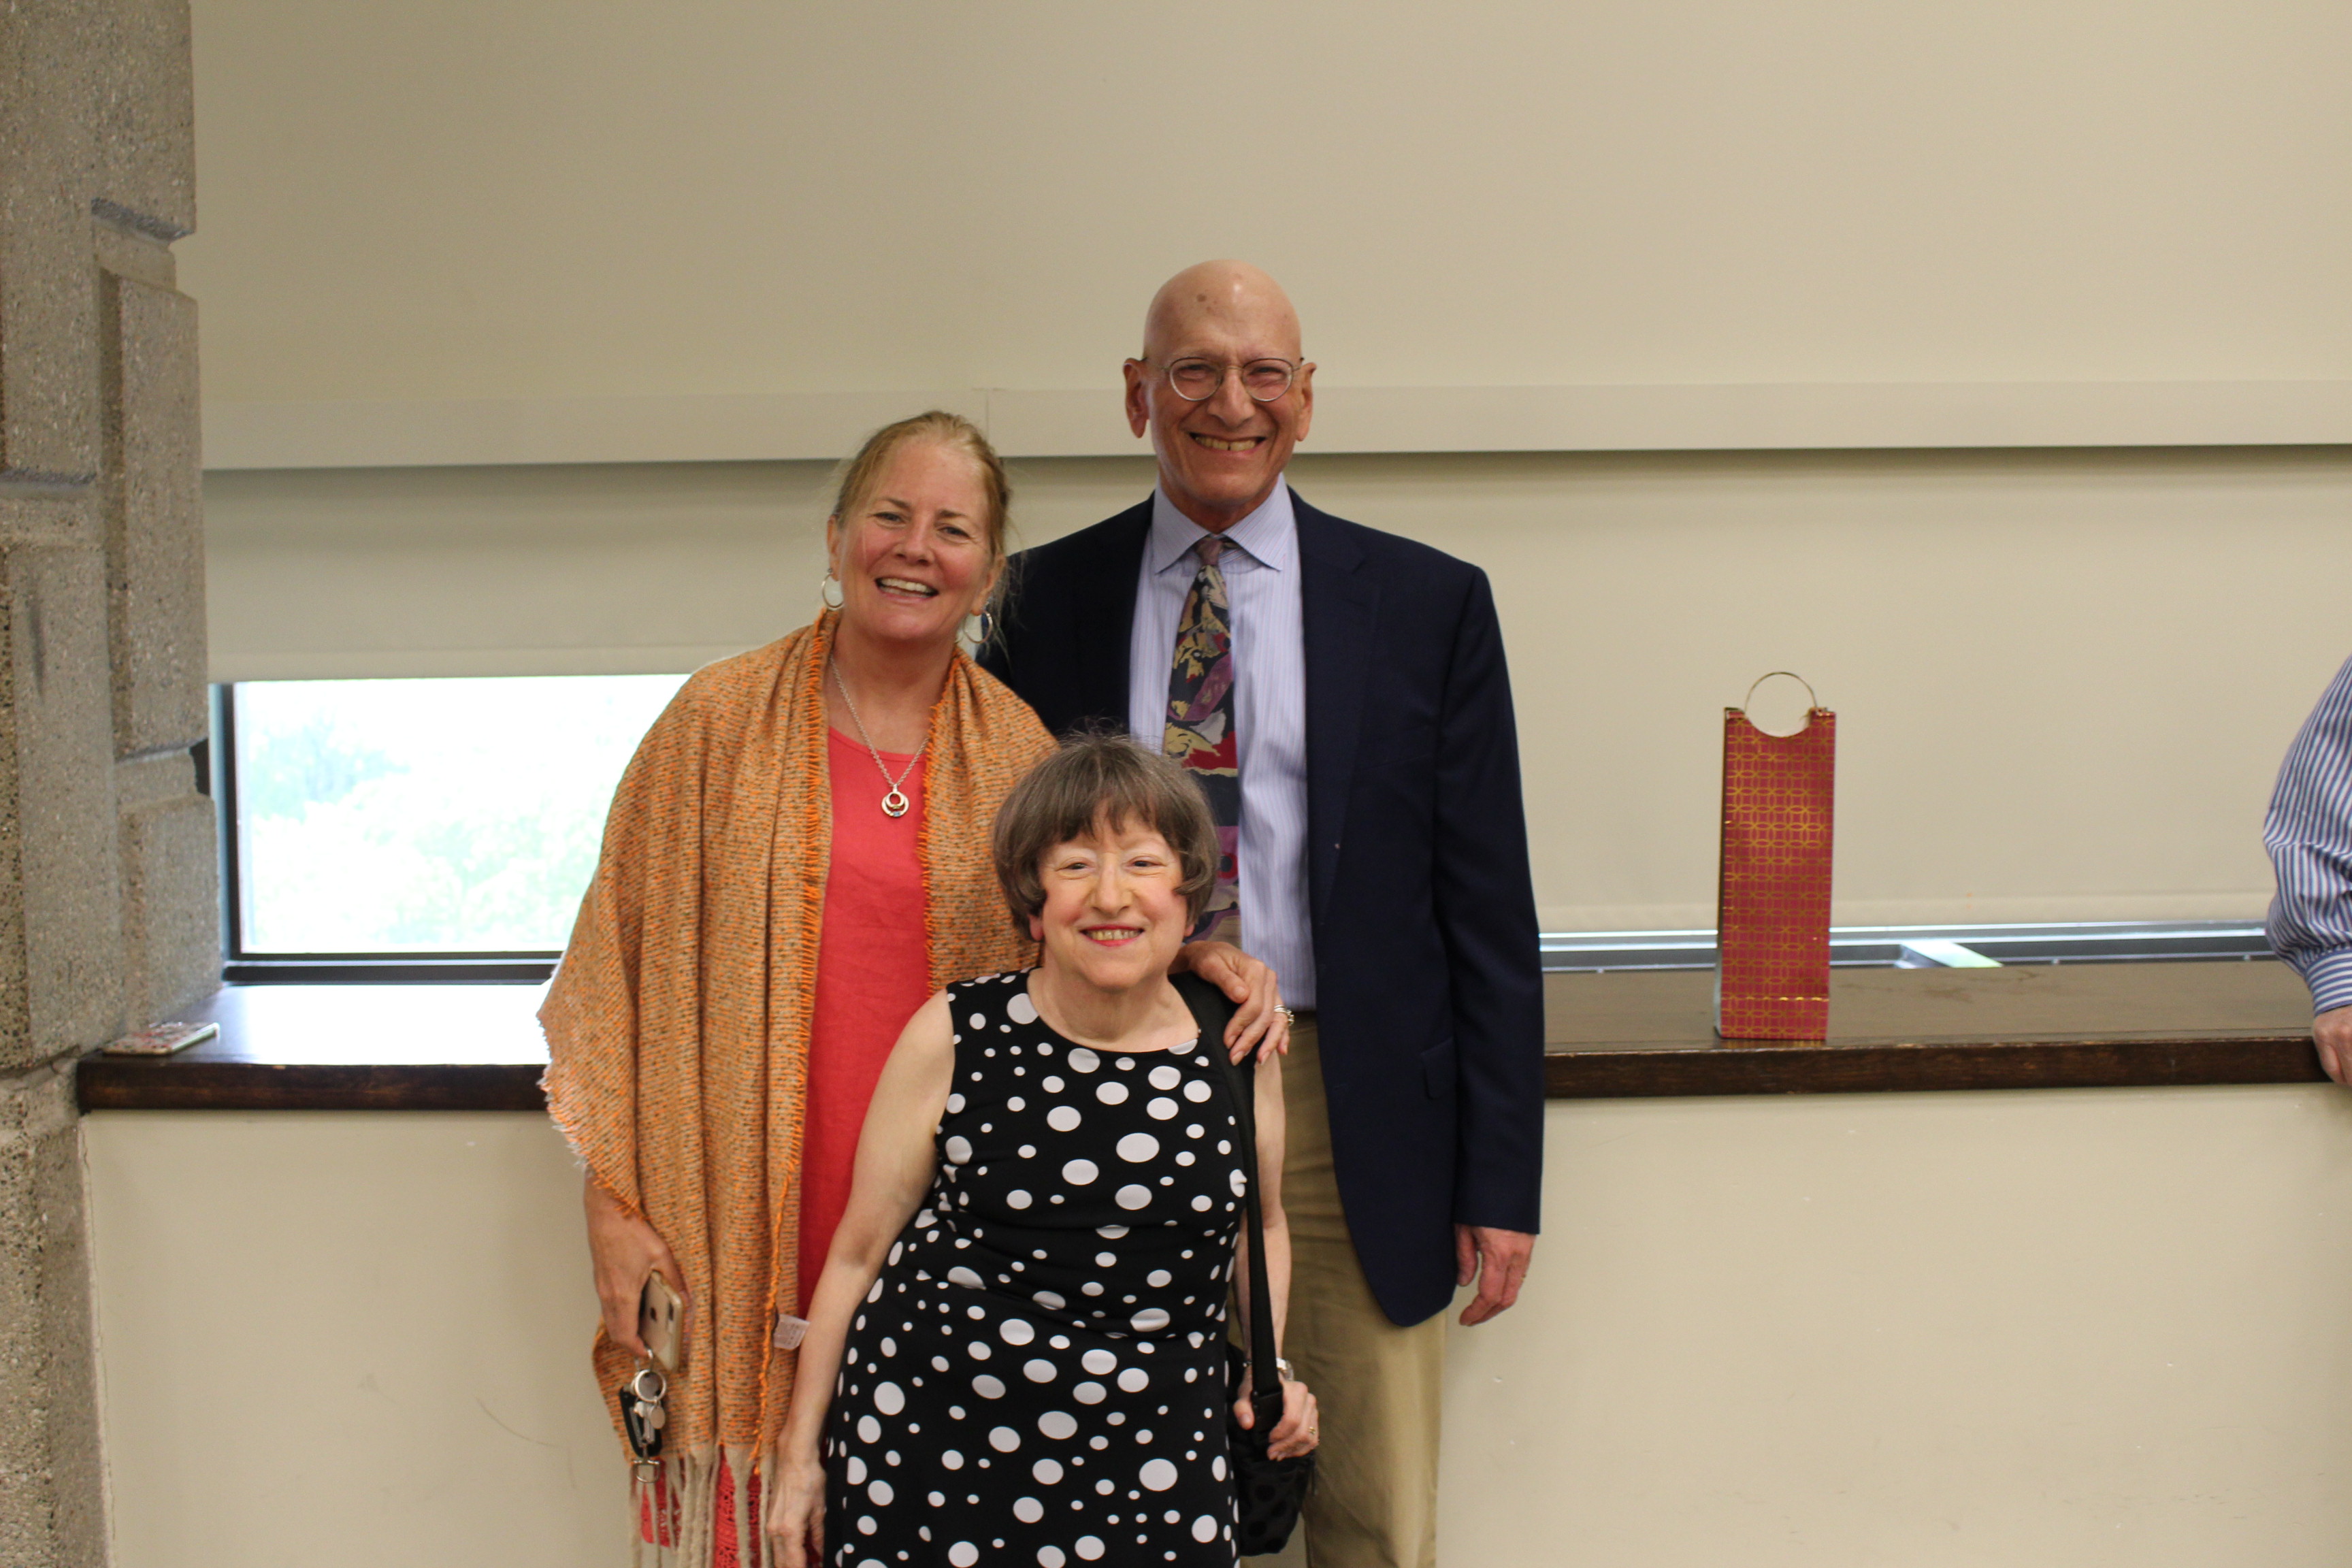 Dean Hartwell pictured with Dr. Goodman and Dr. Hankin at their retirement reception in May 2022